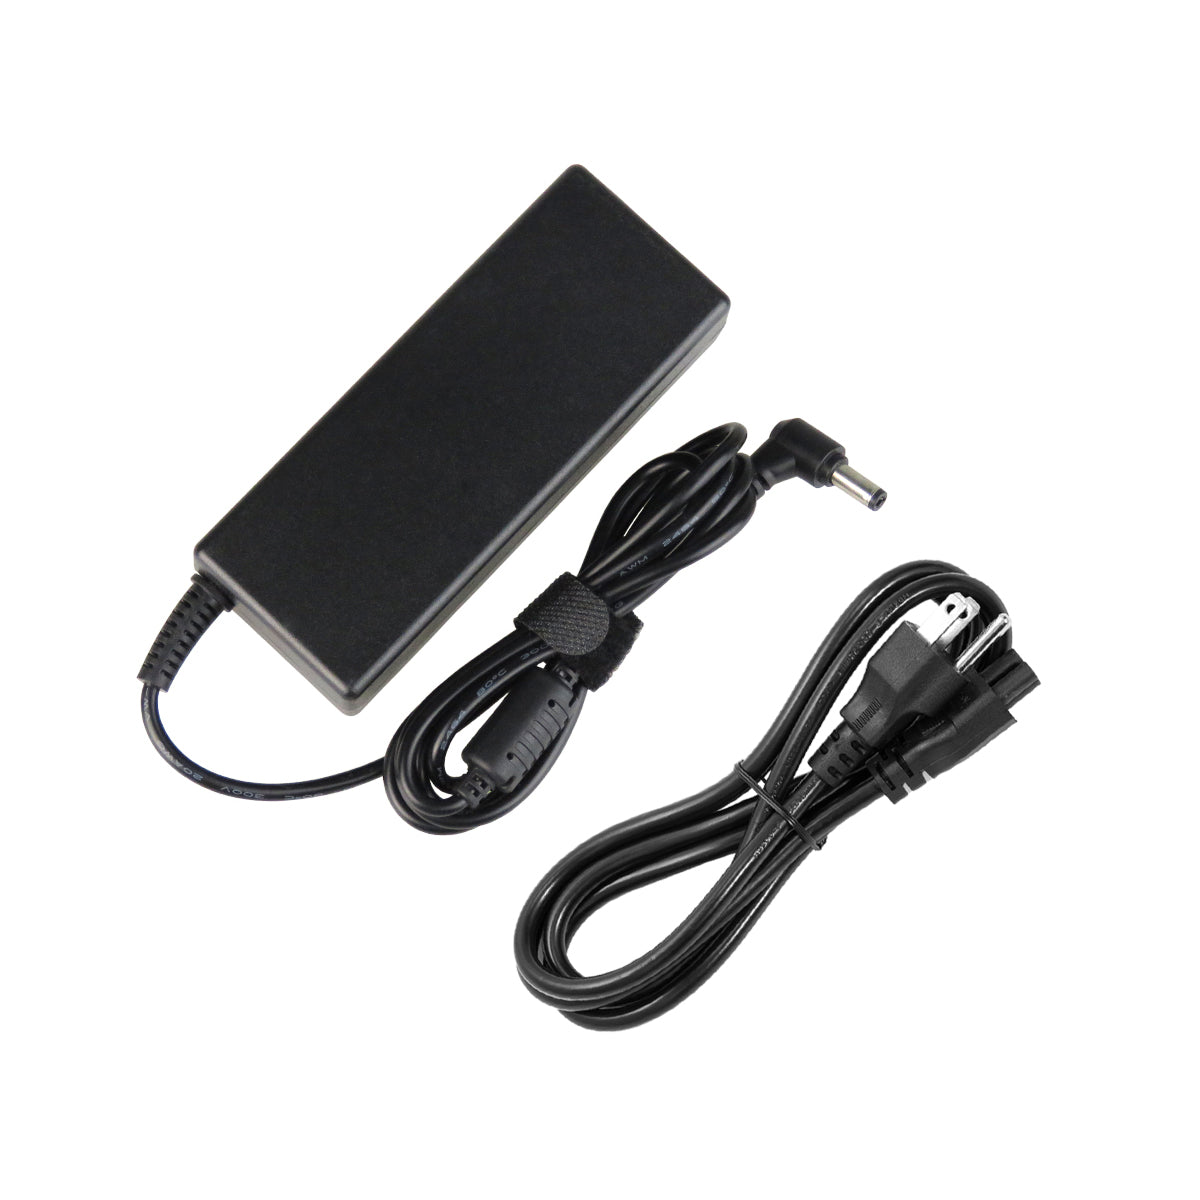 AC Adapter Charger for ASUS A43SA Notebook.